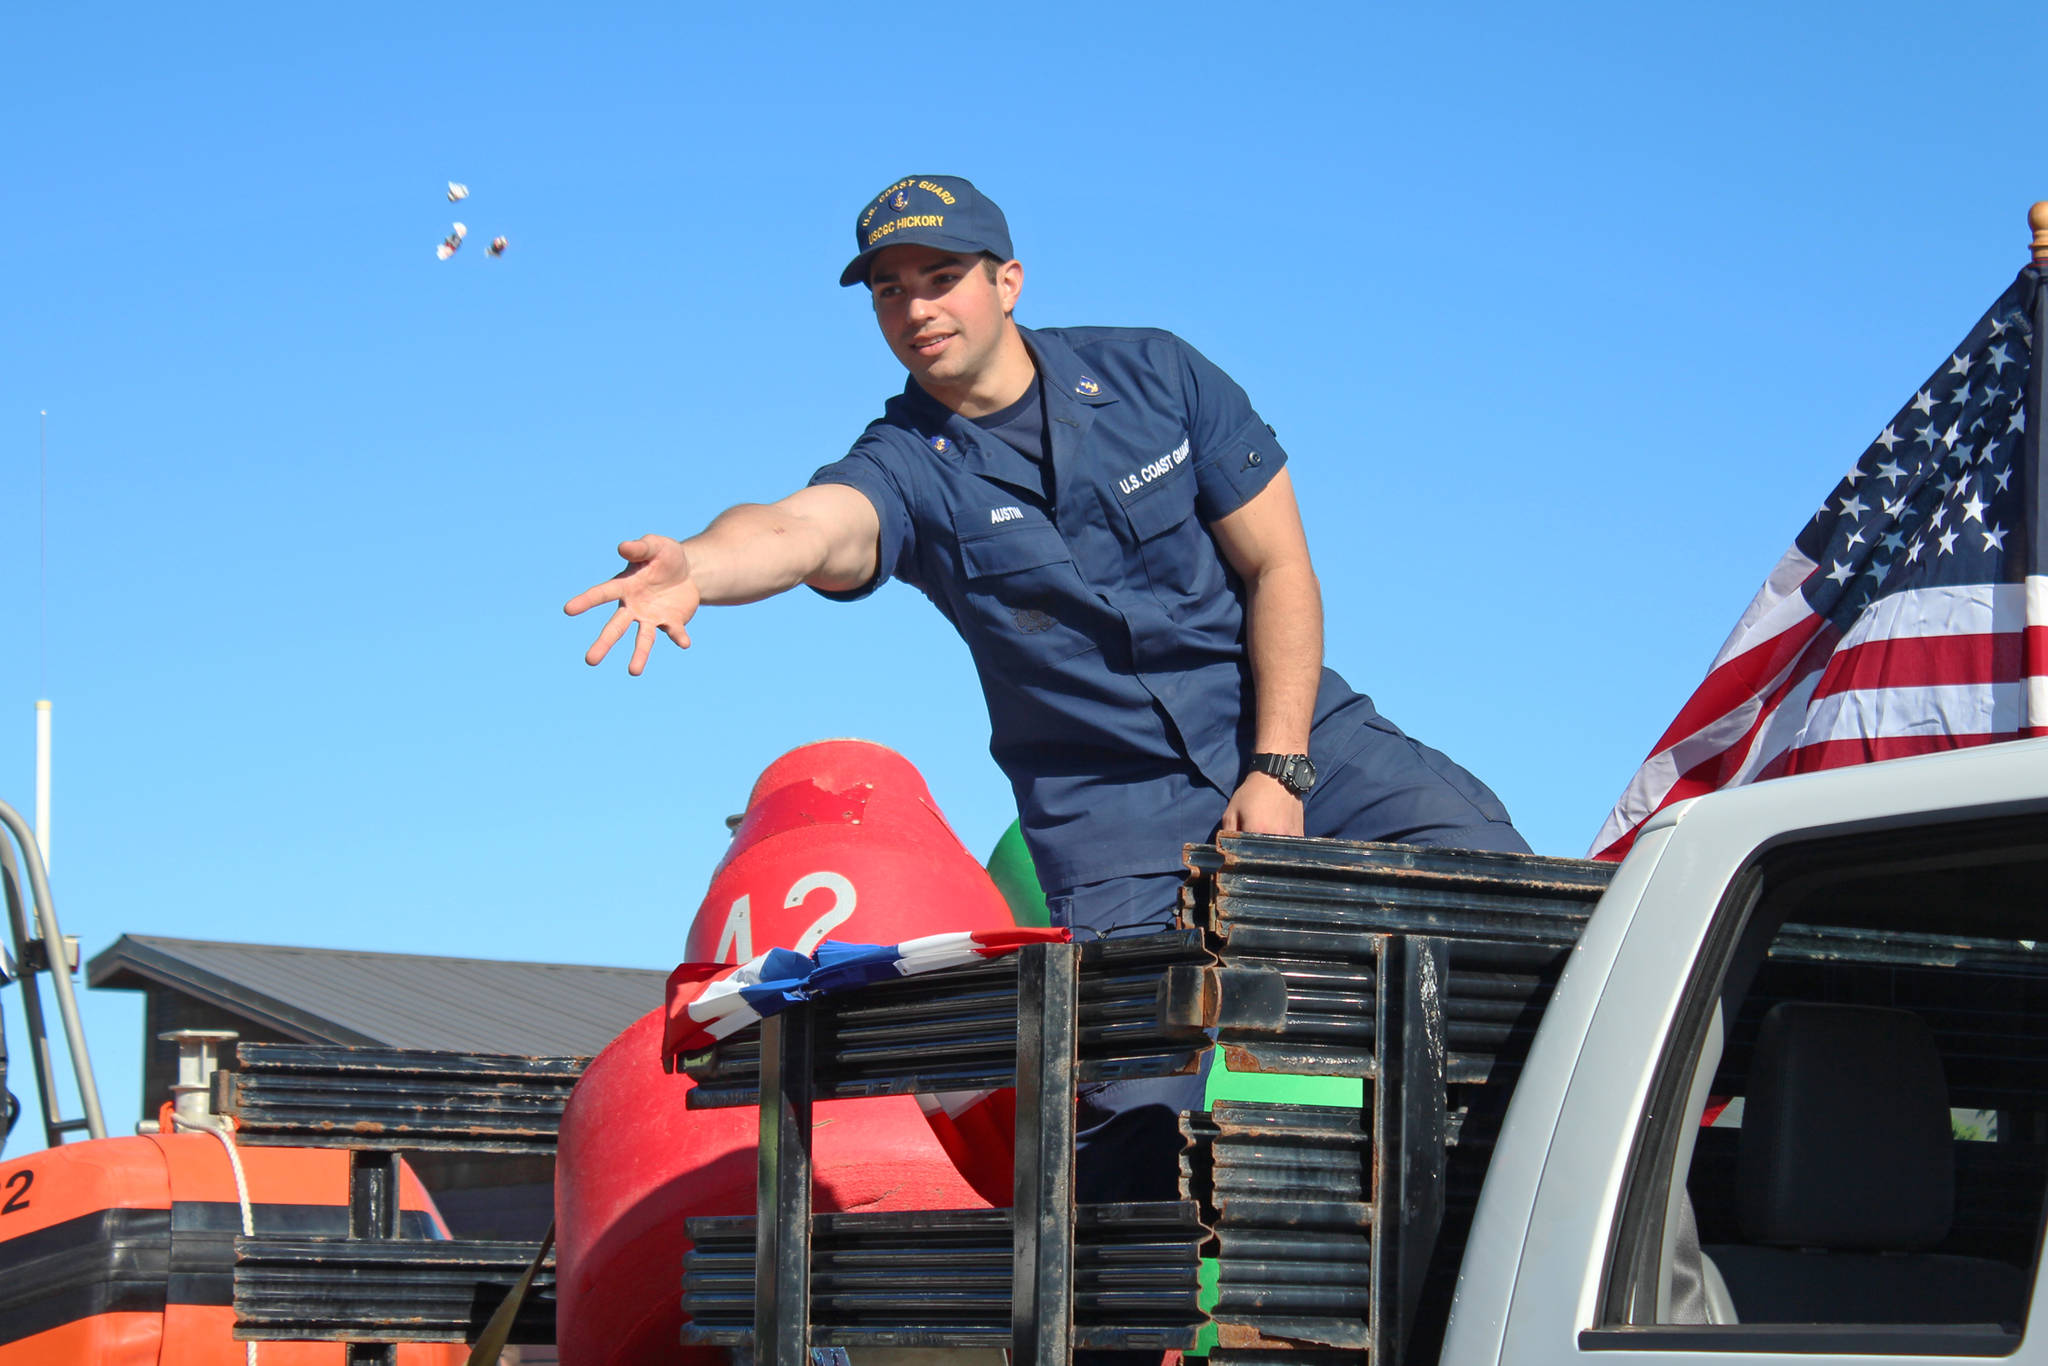 A member of the U.S. Coast Guard tosses candy to children and families lining Pioneer Avenue during the annual Independence Day parade Wednesday, July 4, 2018 in Homer, Alaska. Coast Guard participants were representing the U.S. Coast Guard Cutter Hickory, also called the “Bull of the North.” (Photo by Megan Pacer/Homer News)